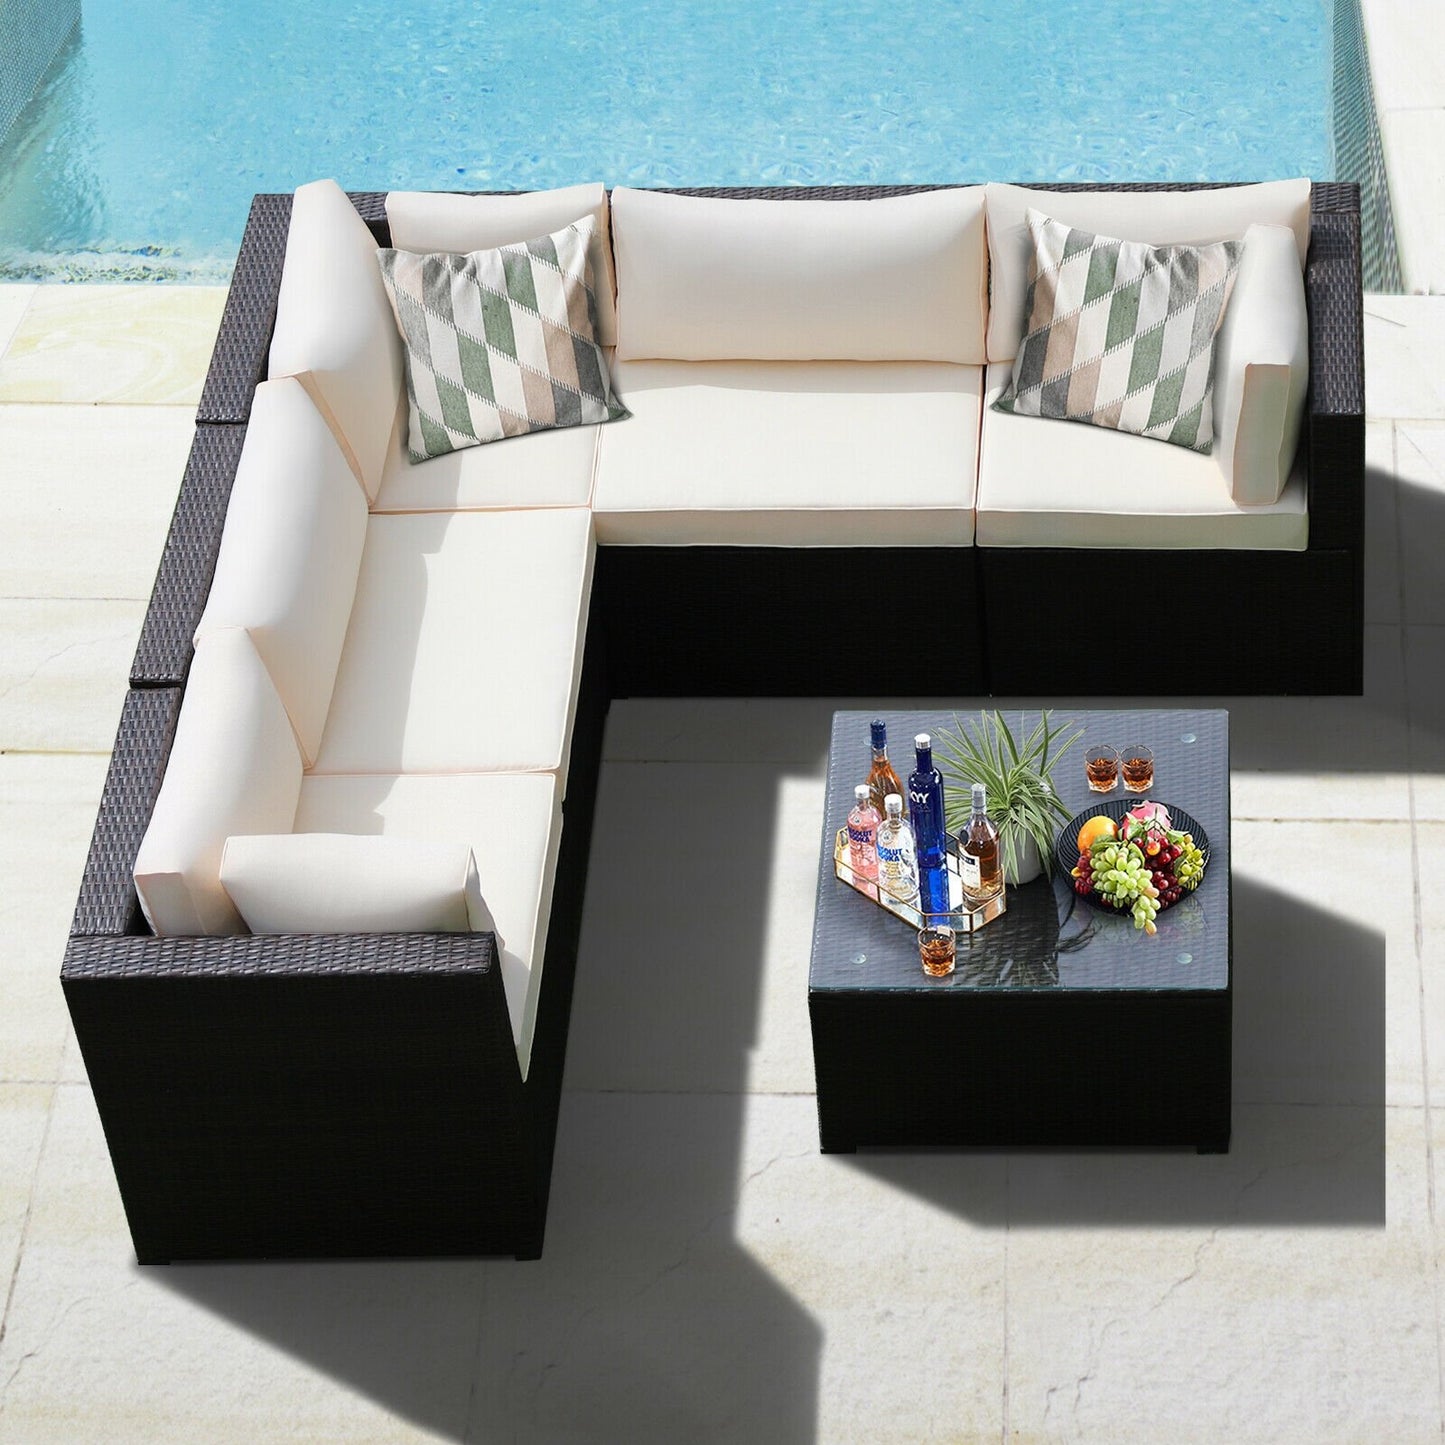 6 Pieces Patio Furniture Sofa Set with Cushions for Outdoor, Beige - Gallery Canada